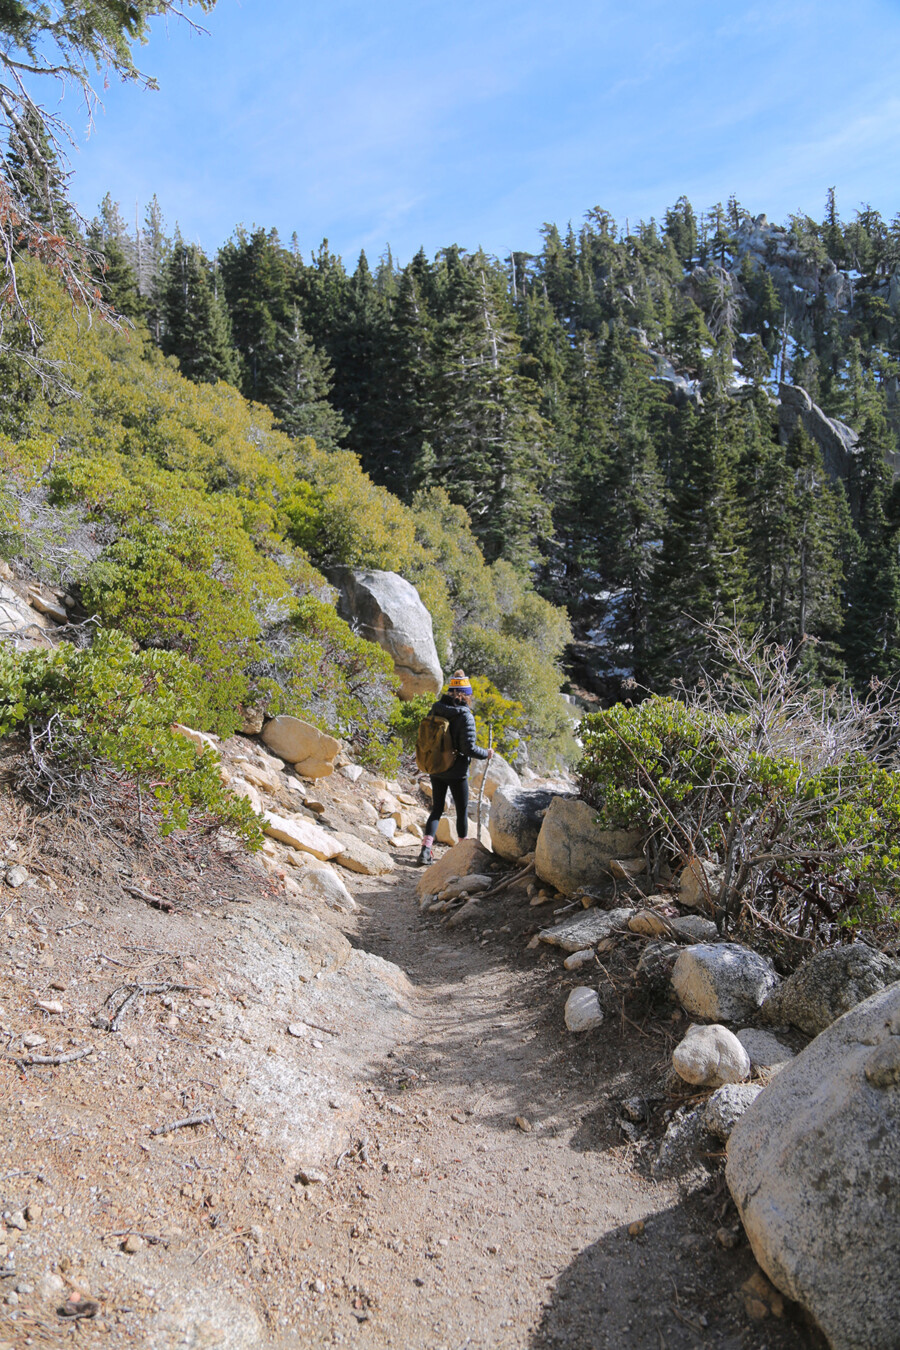 A woman on a hiking trail in Idyllwild, California.